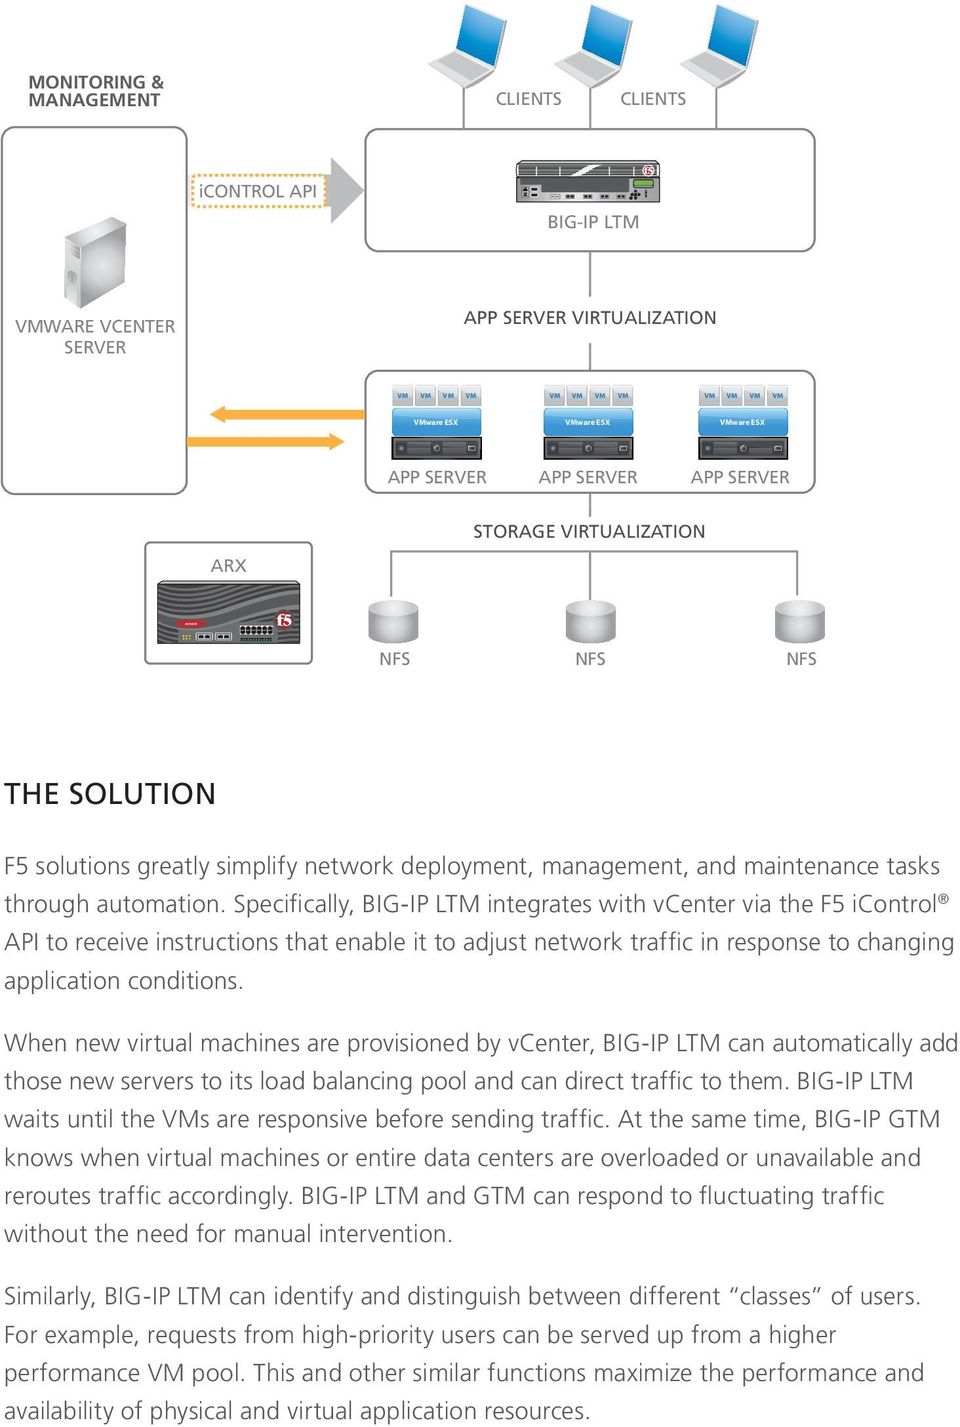 Specifically, BIG-IP LTM integrates with vcenter via the F5 icontrol API to receive instructions that enable it to adjust network traffic in response to changing application conditions.